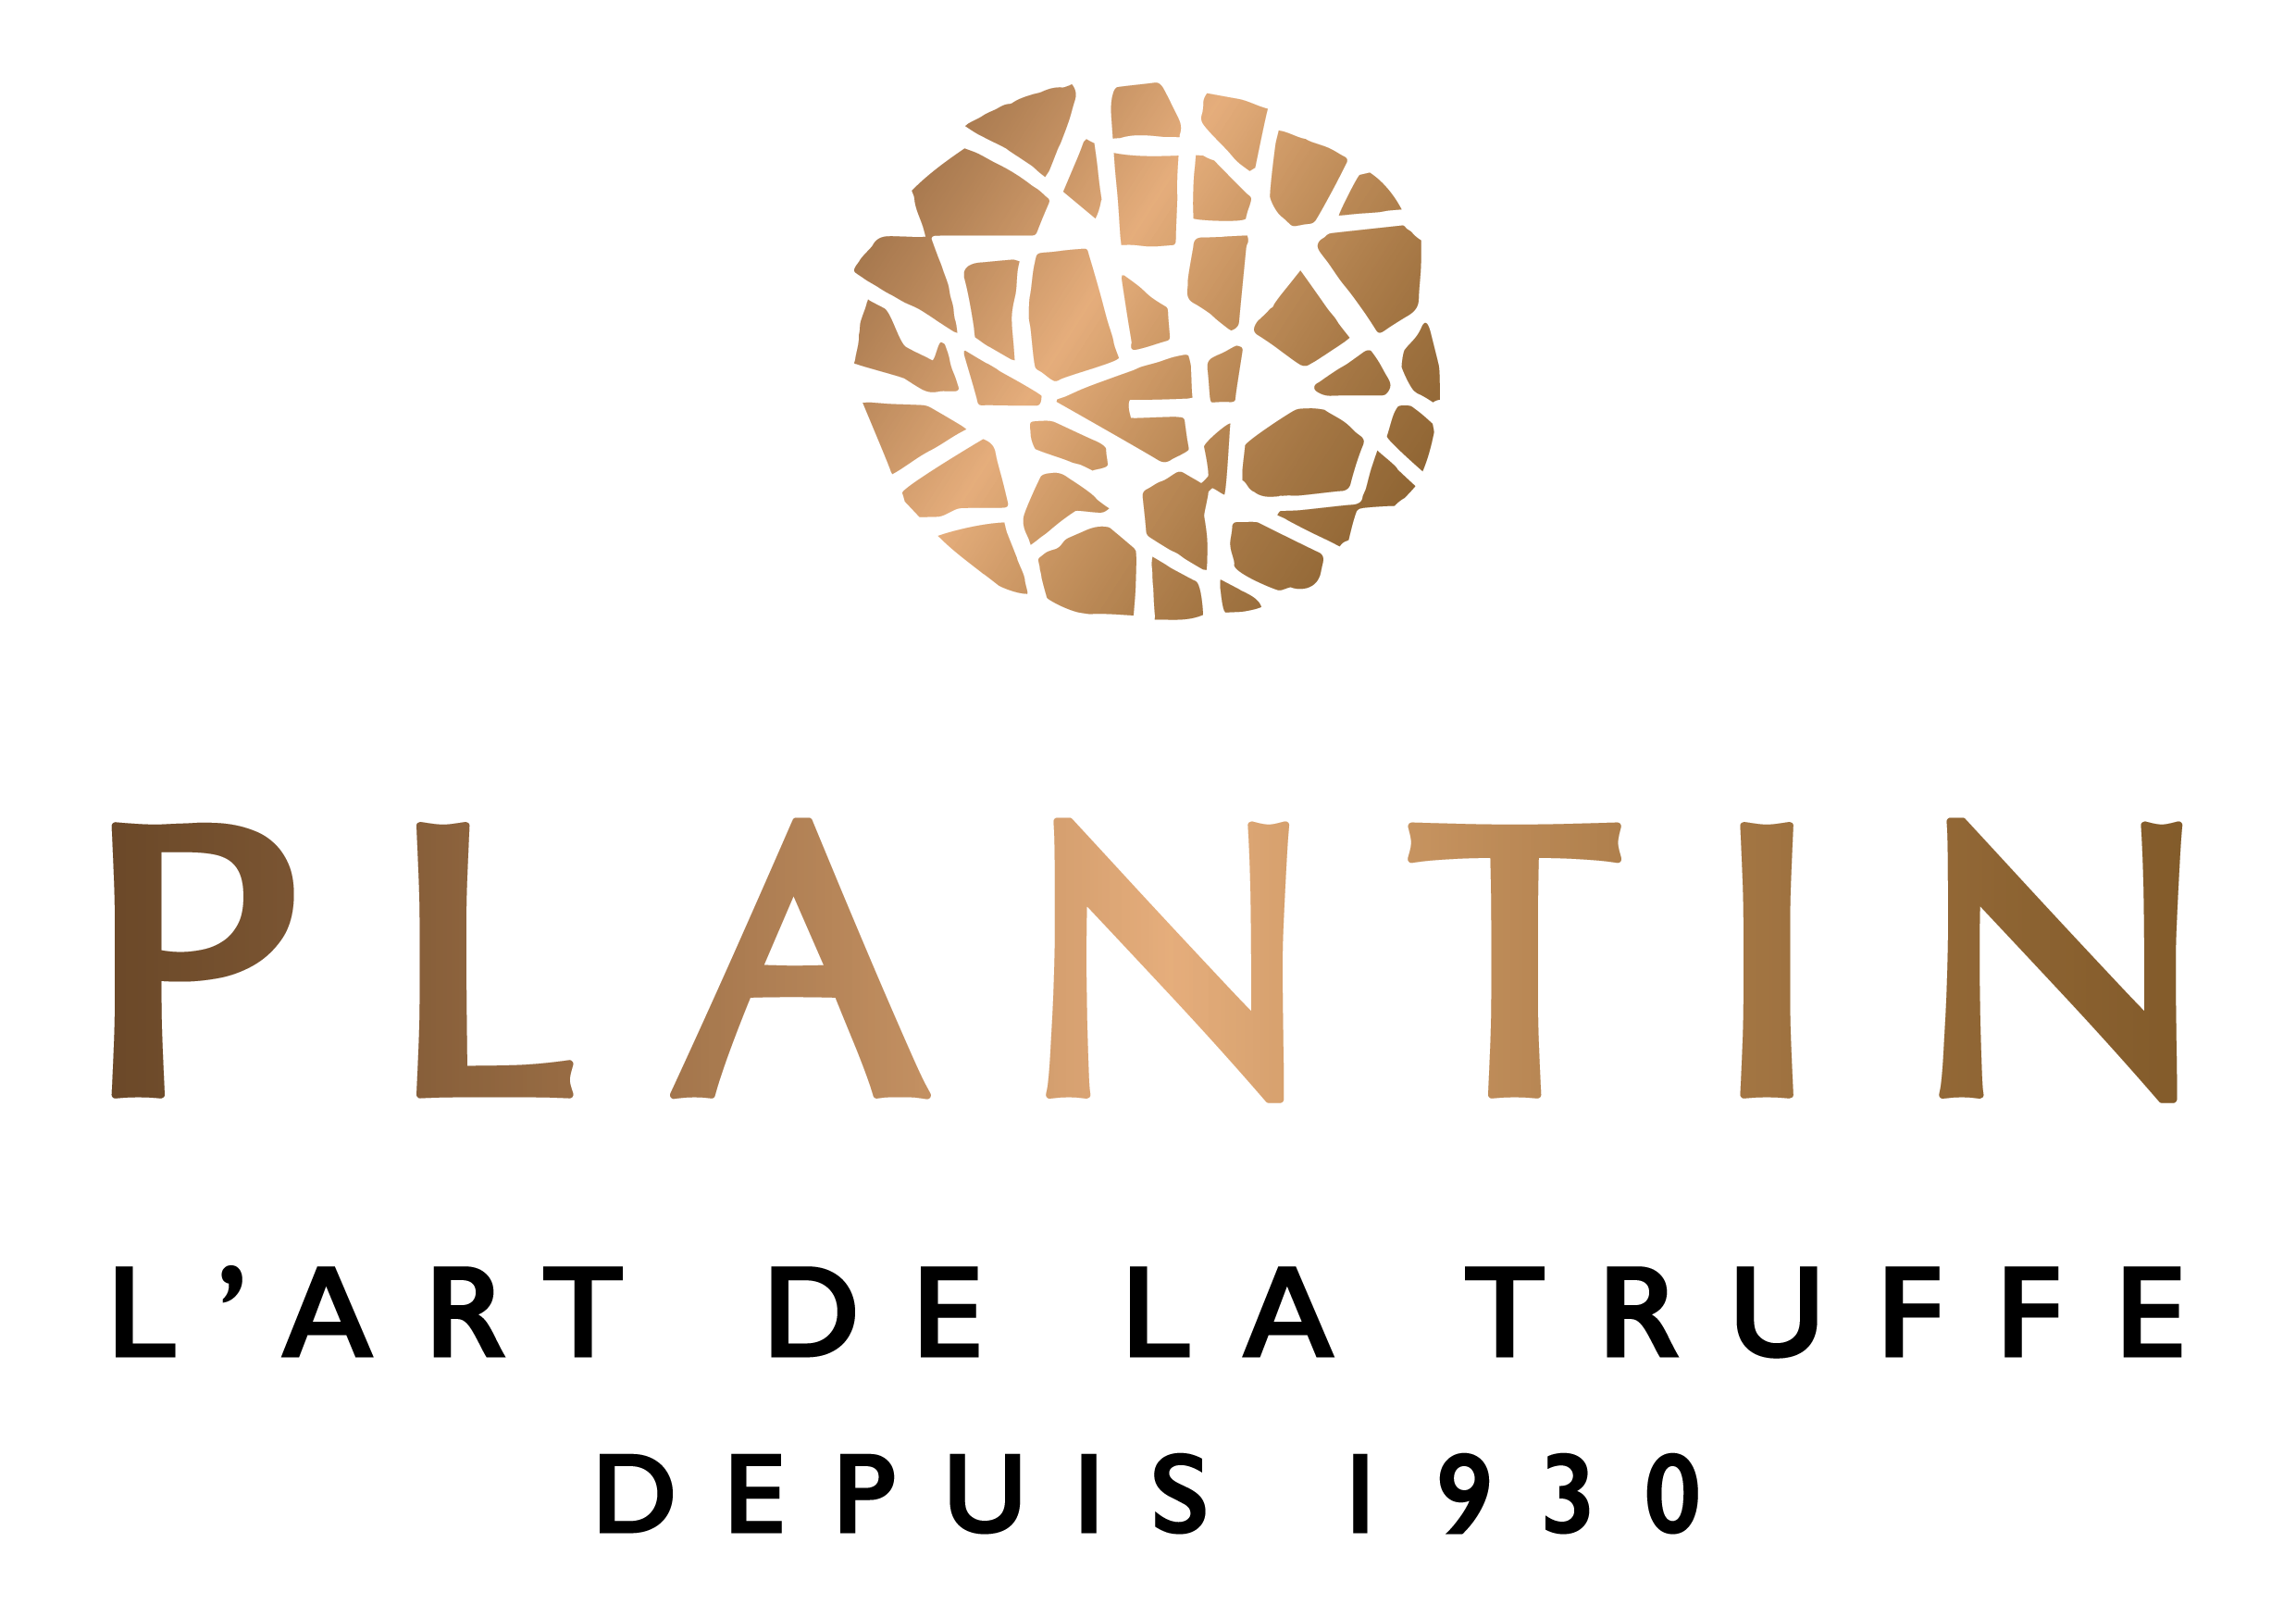 PLANTIN - The Art of the truffle since 1930